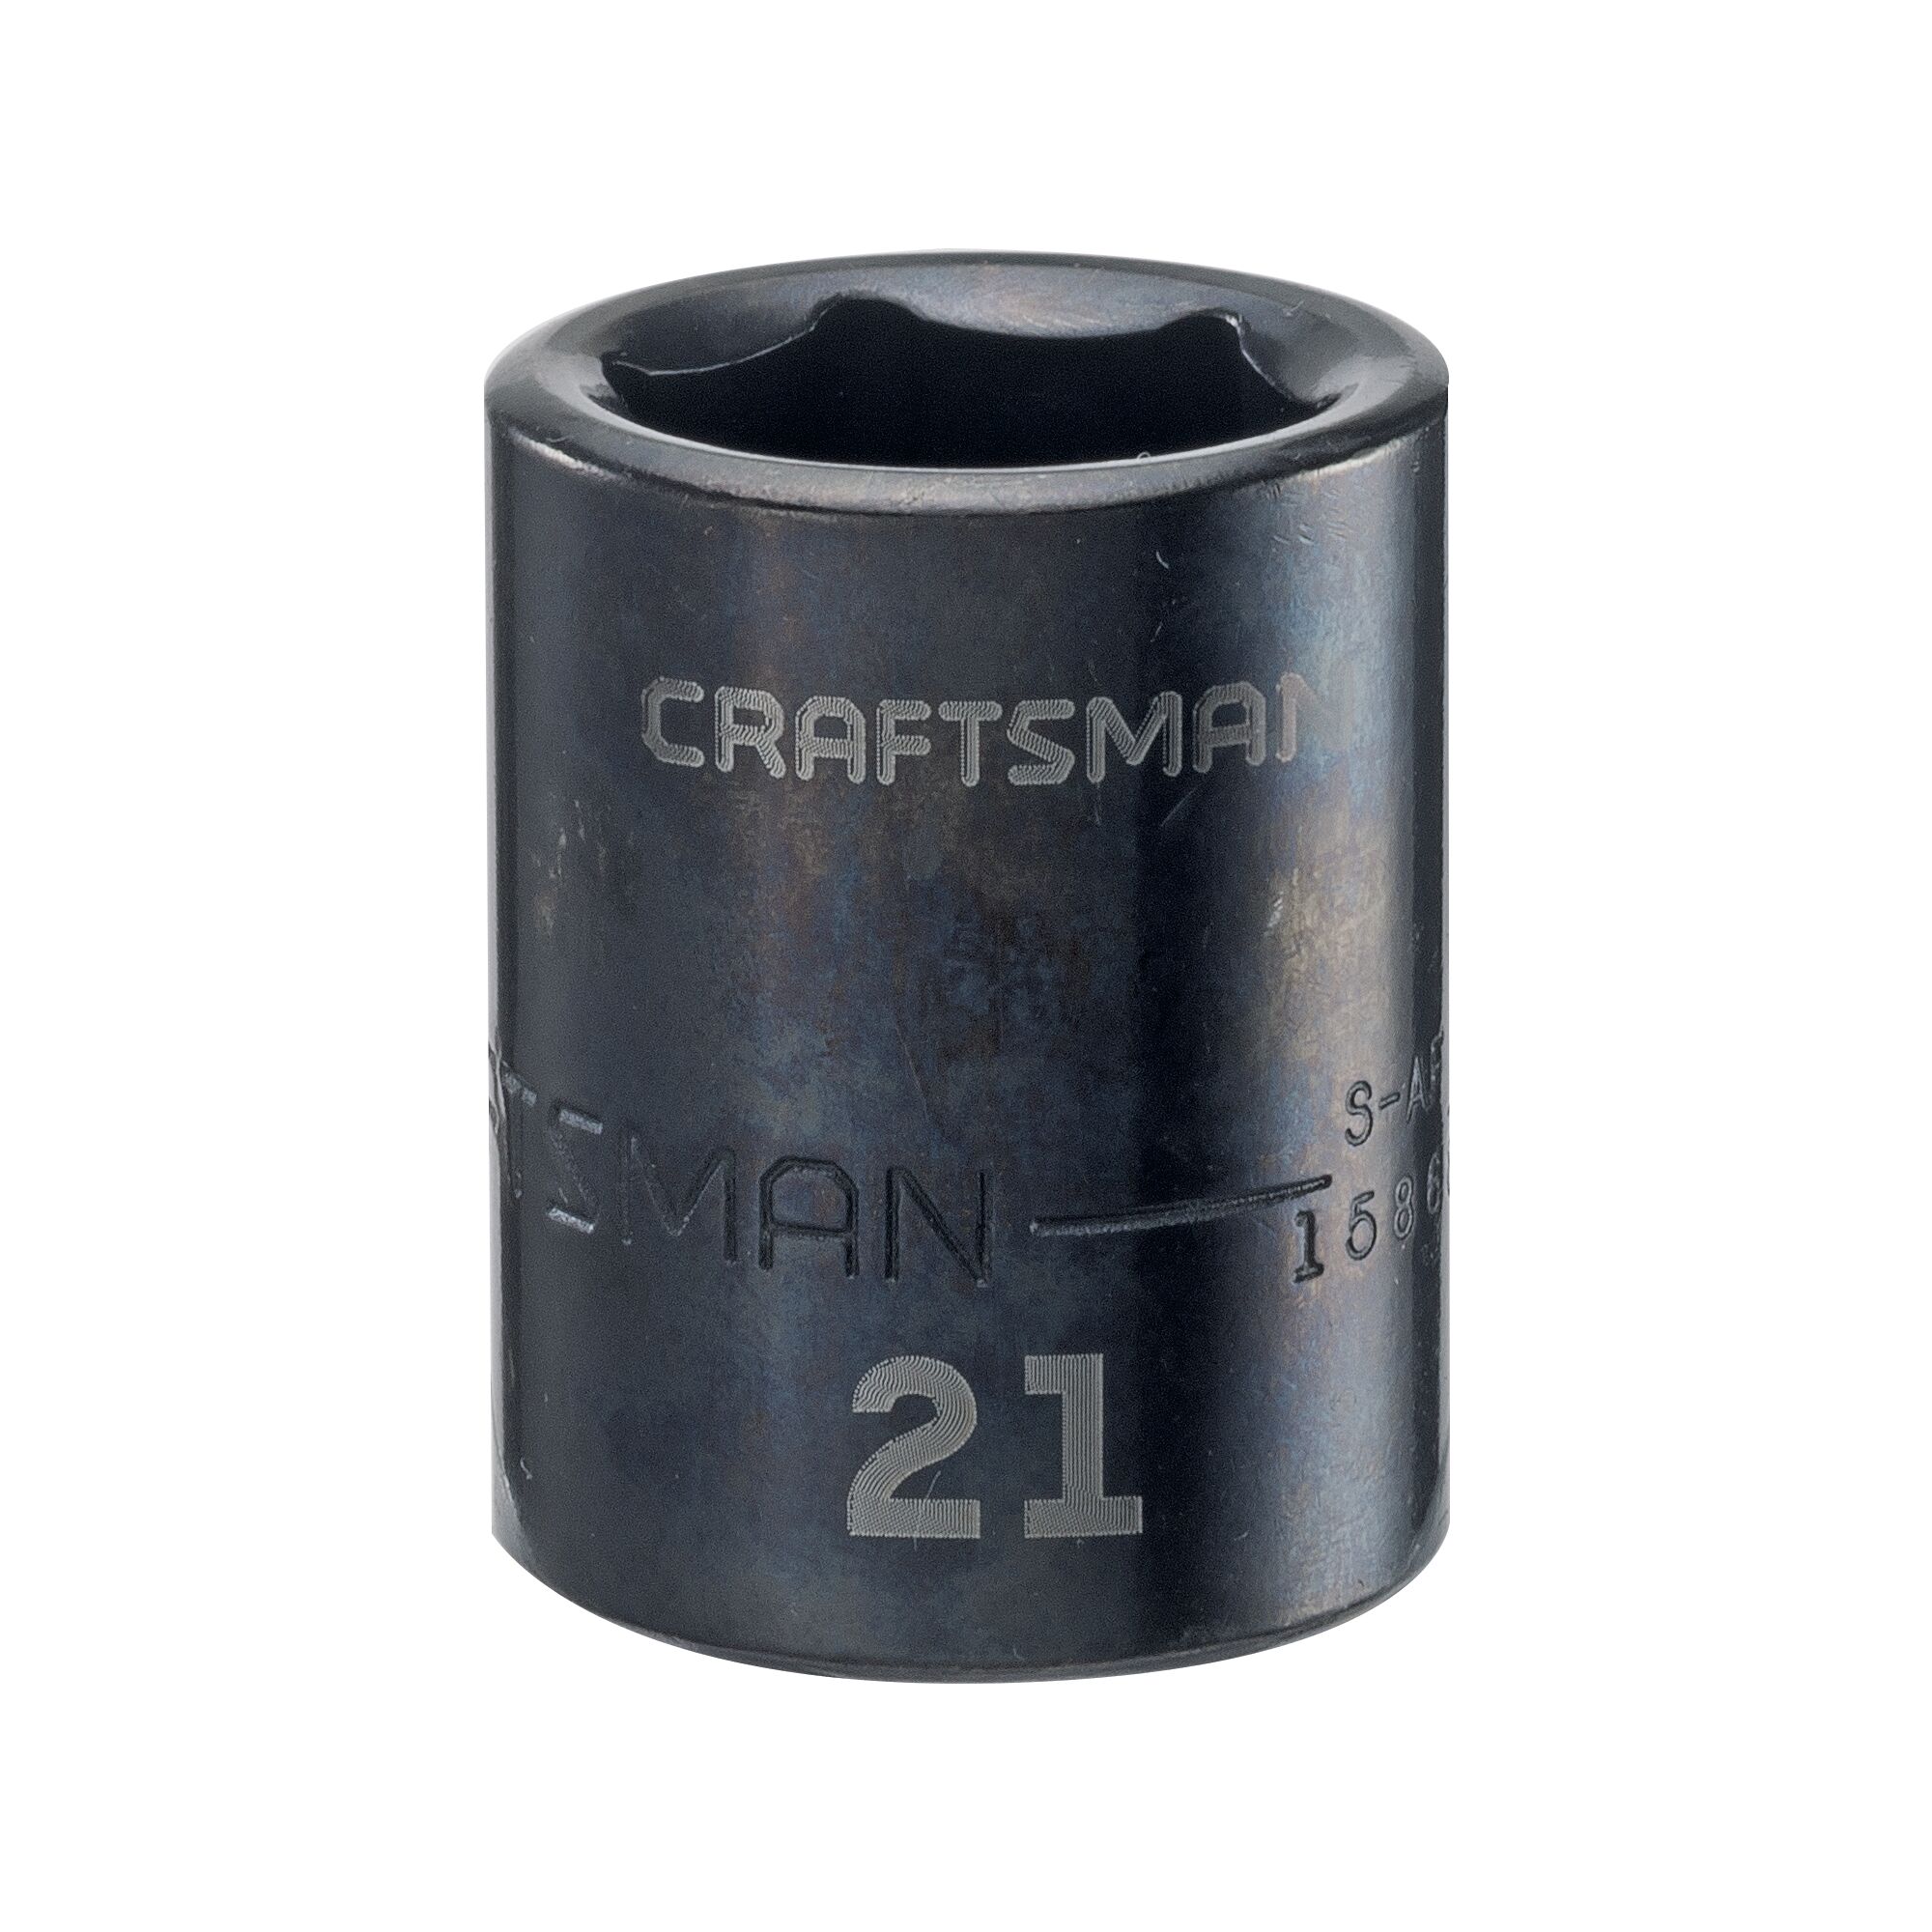 View of CRAFTSMAN Sockets: Impact on white background